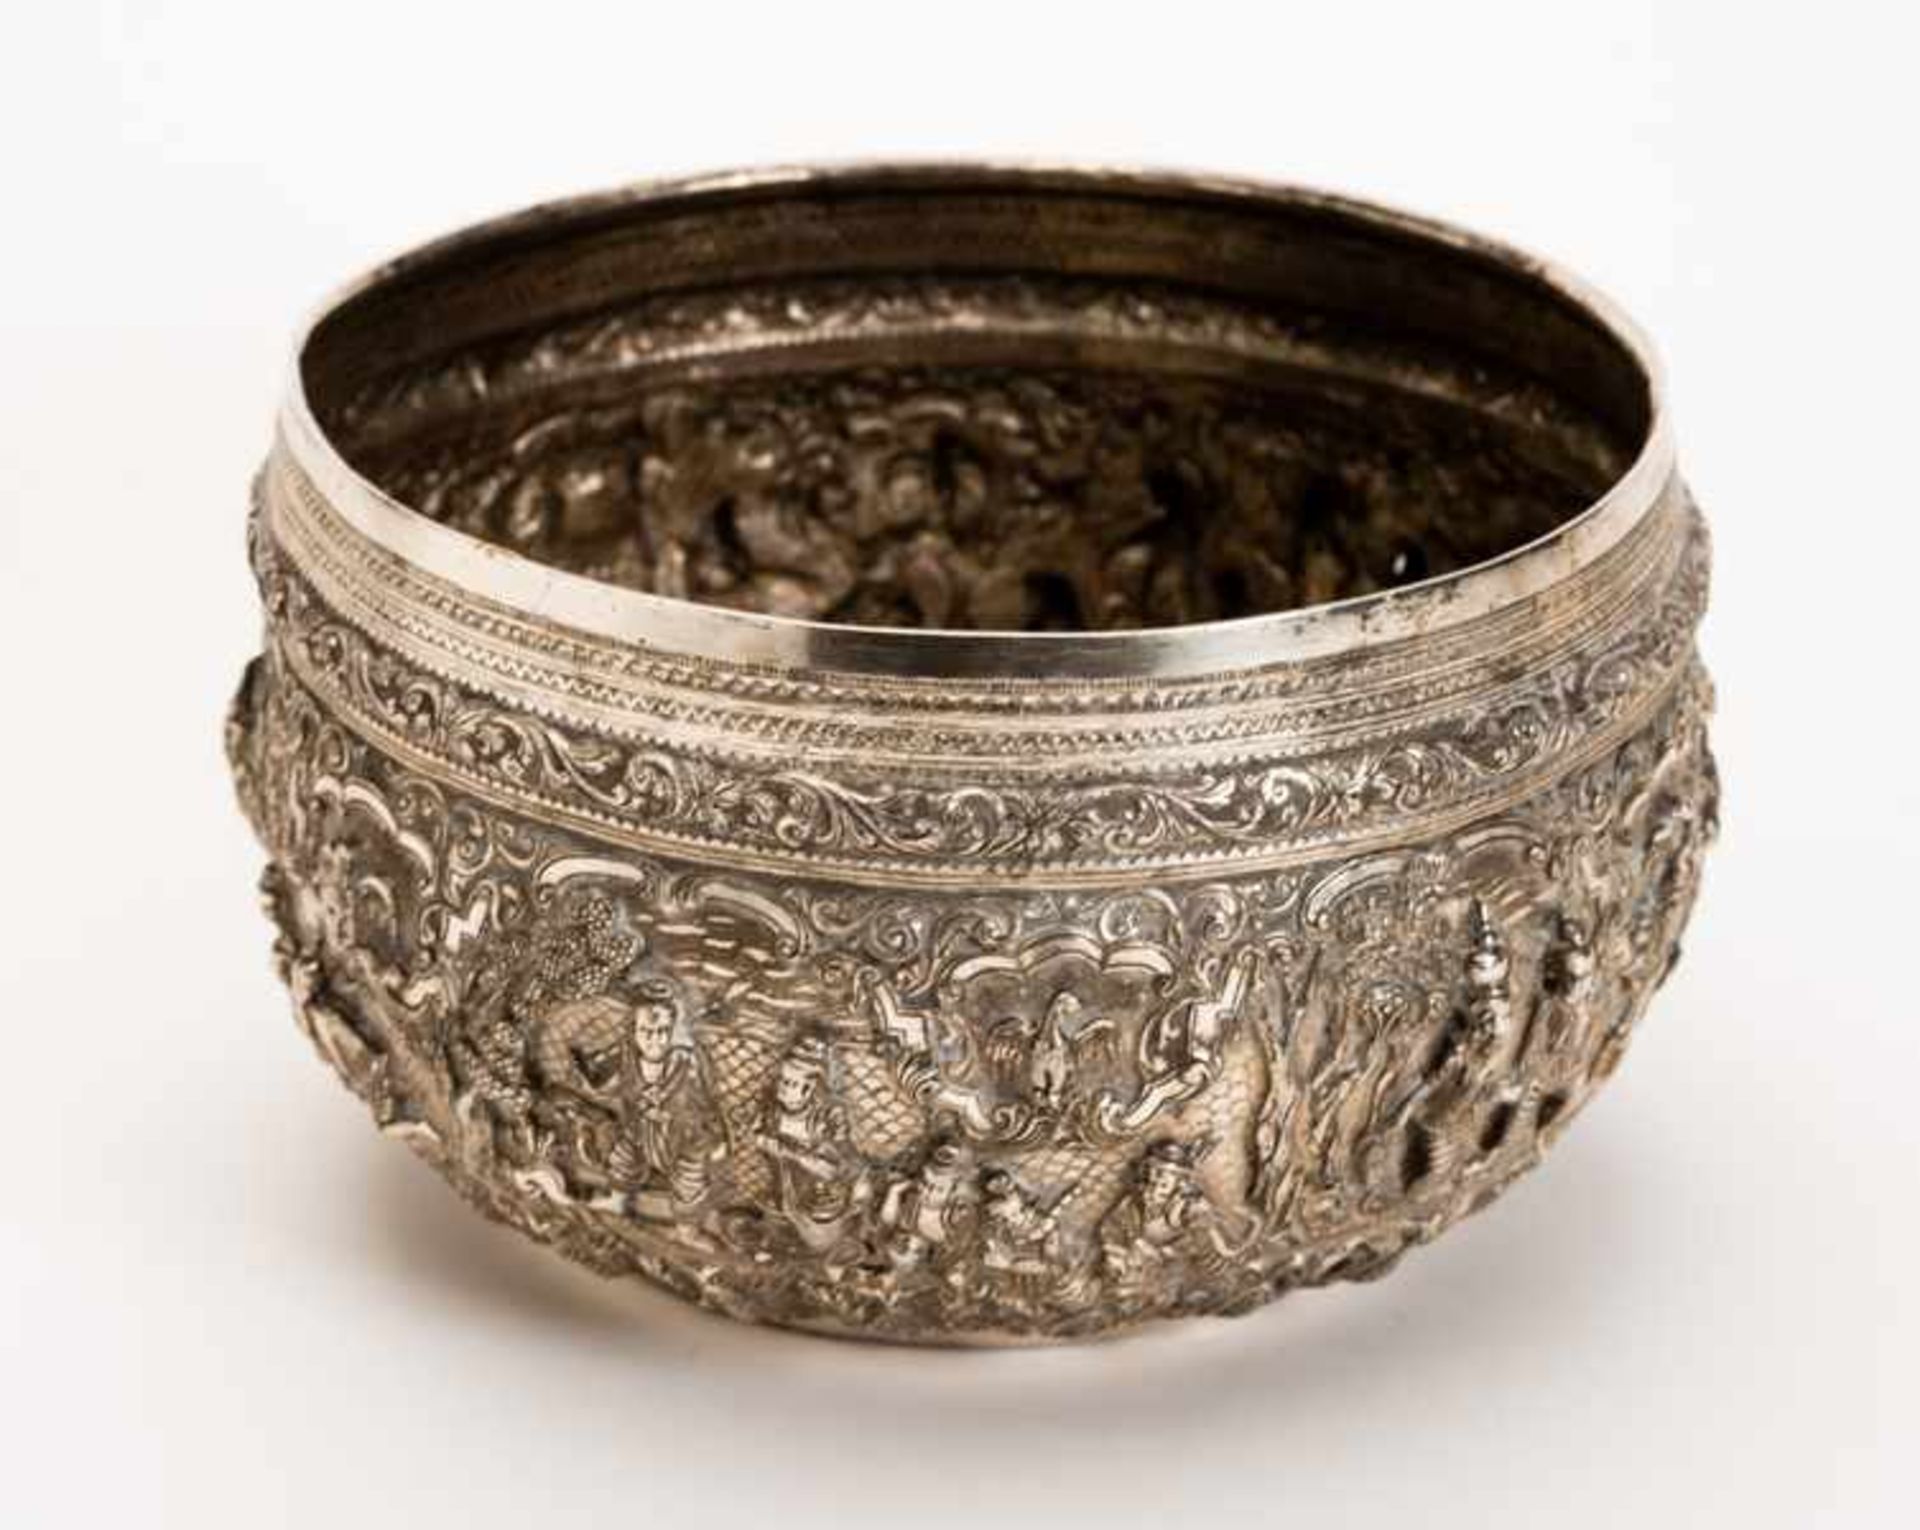 DEEP DECORATIVE BOWL WITH FIGURATIVE SCENCES Copper alloy, silver-plated. Burma, first half of - Image 5 of 6